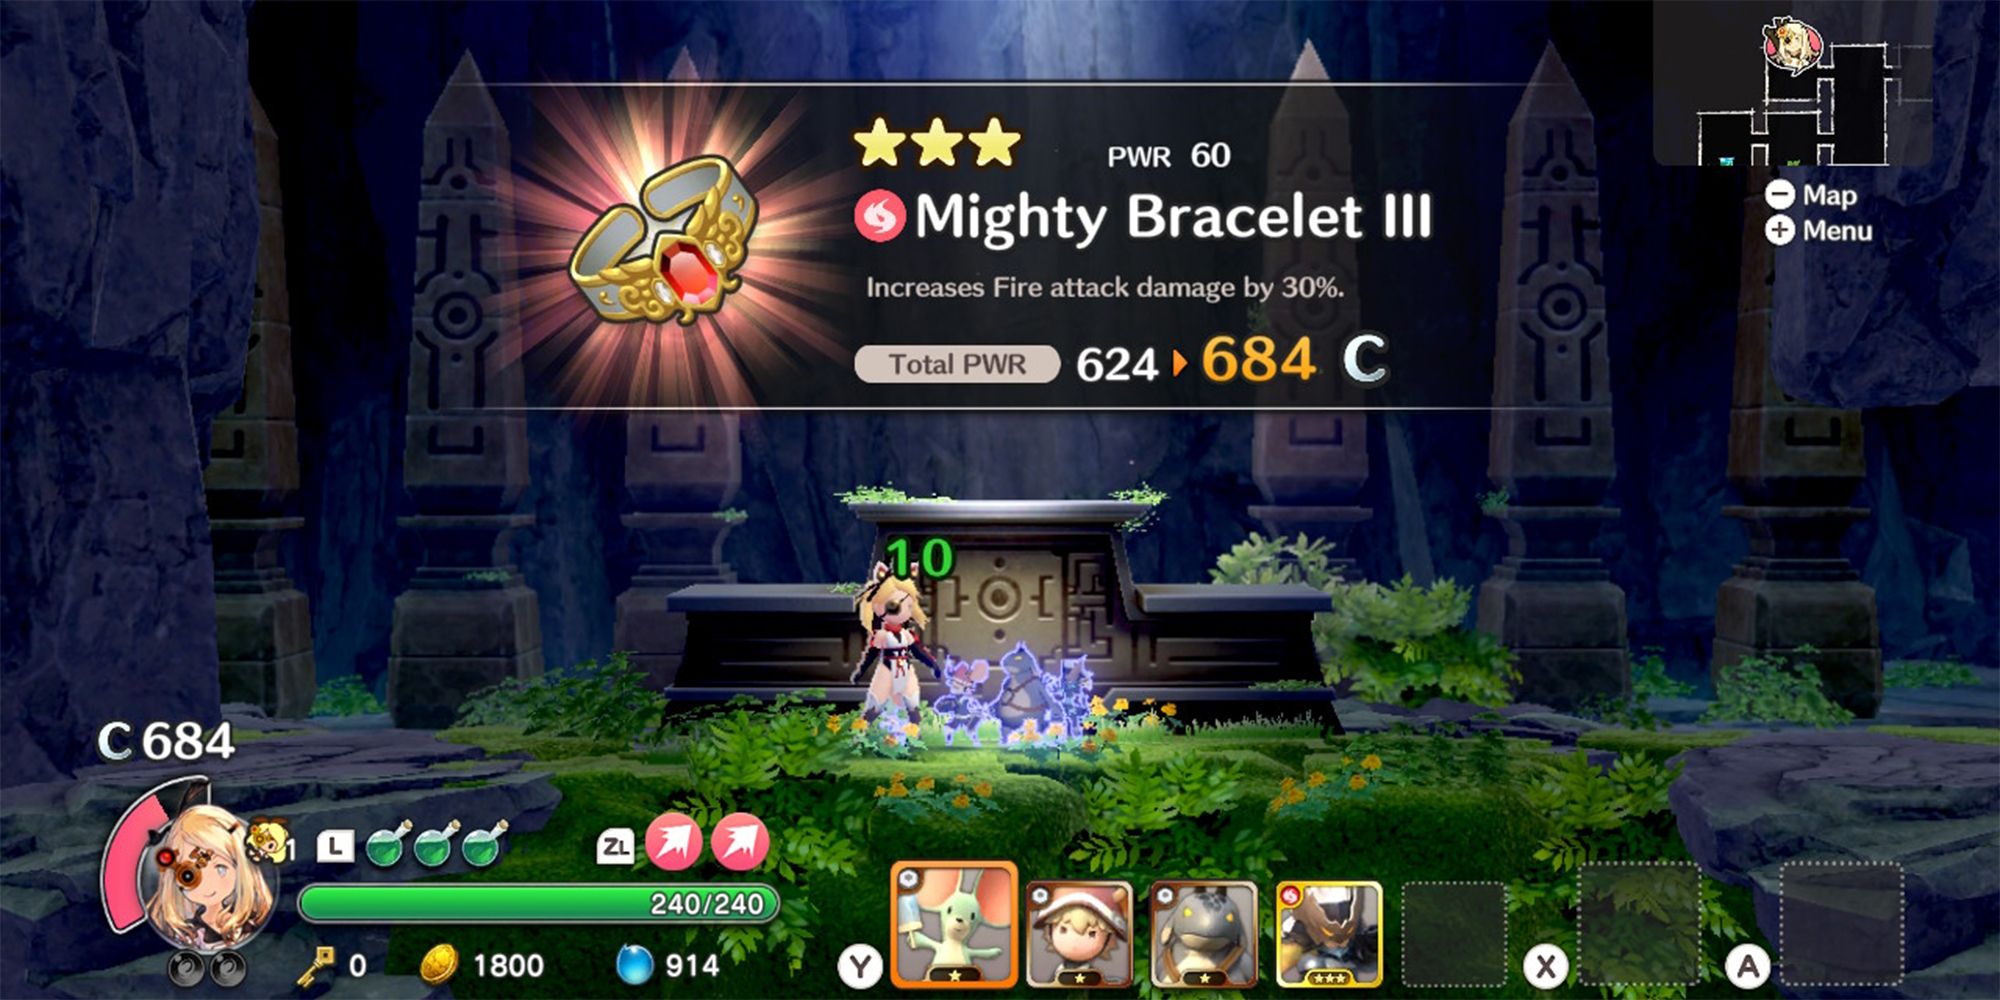 mighty bracelet III accessory found in ruins